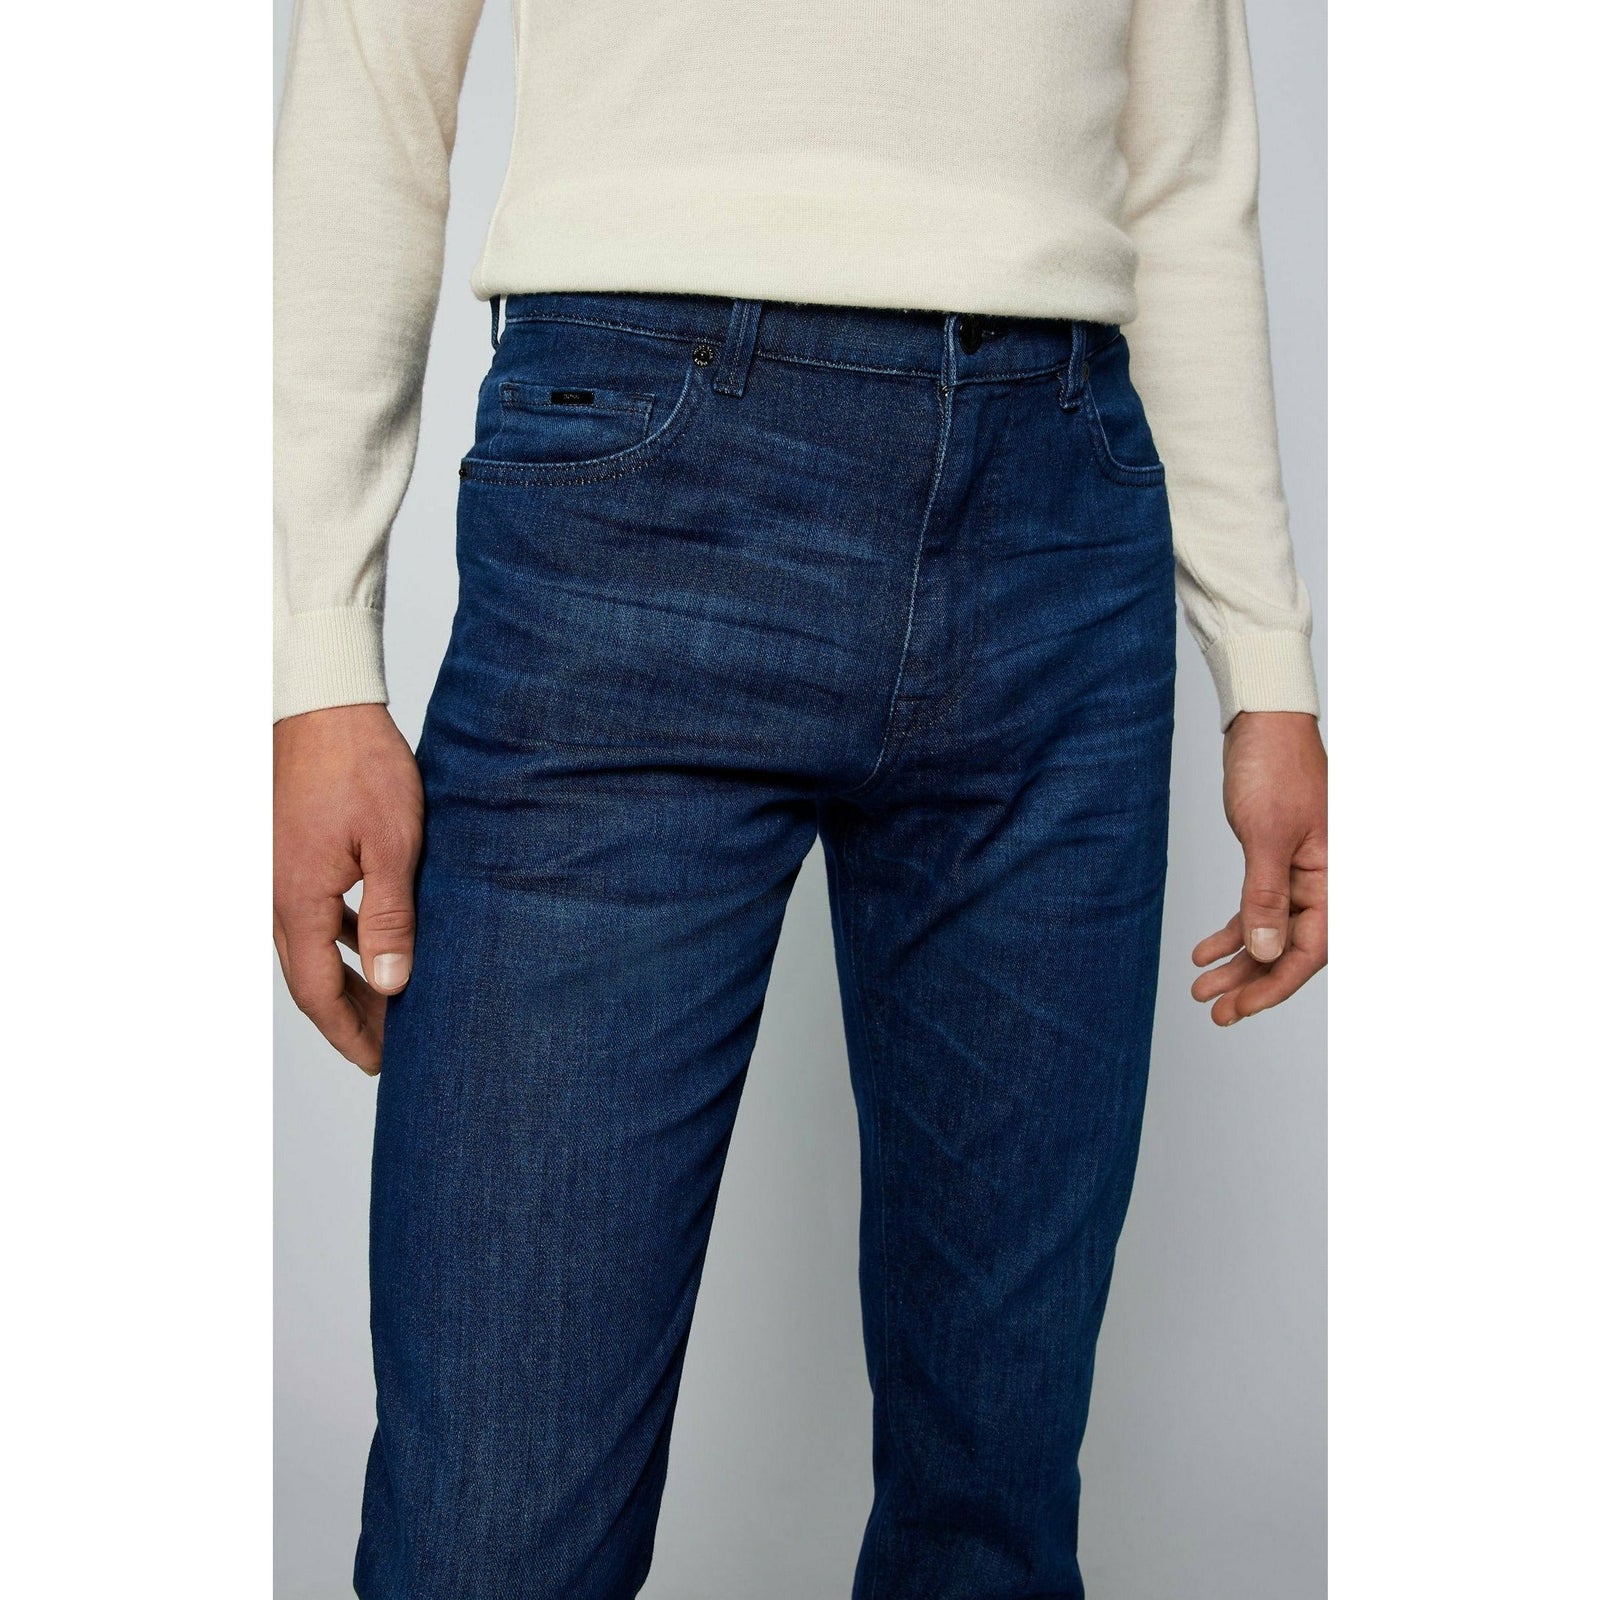 RELAXED-FIT JEANS IN SUPER-SOFT DARK-BLUE DENIM - Yooto